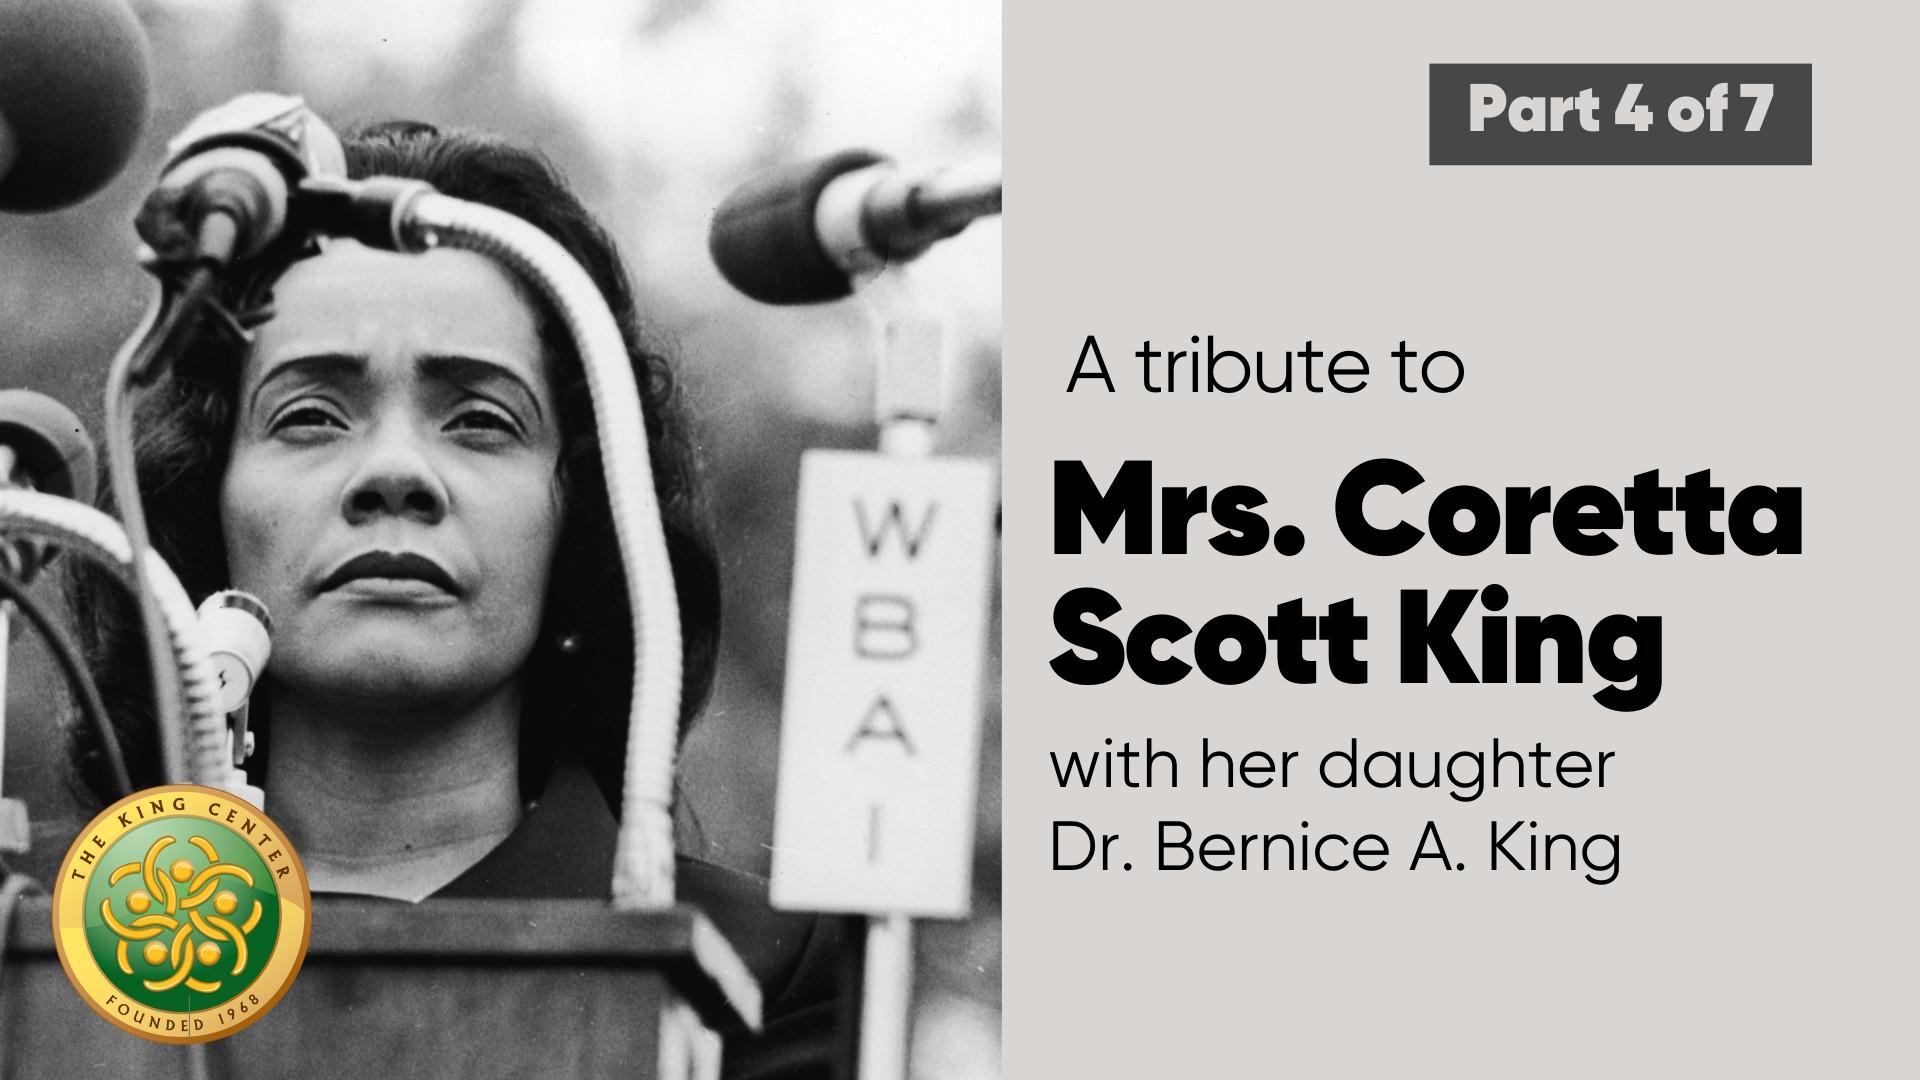 A tribute to Mrs. Coretta Scott King with her daughter Dr. Bernice A. King- Part 4 of 7